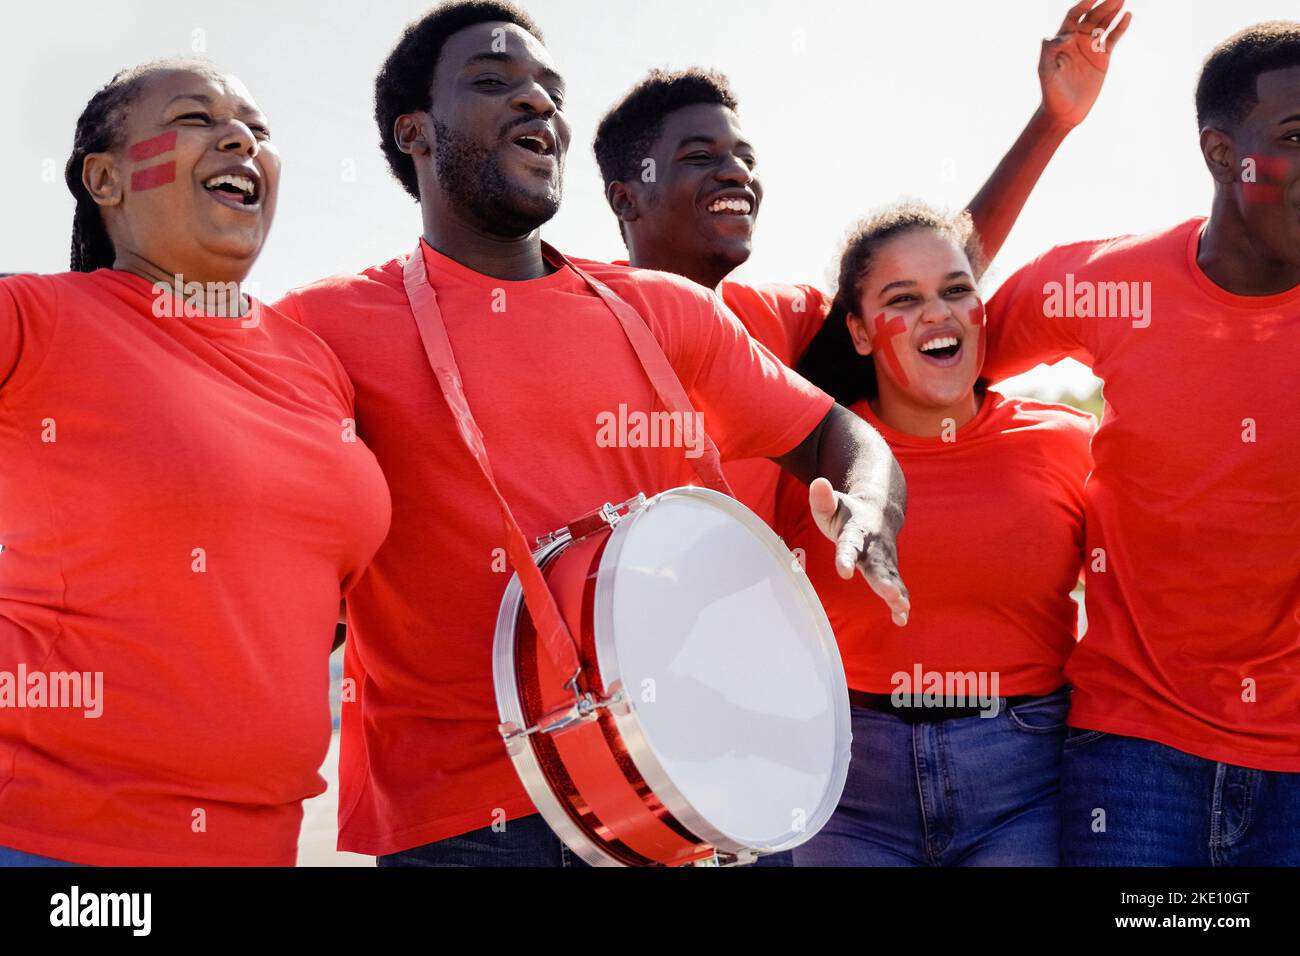 African red sport football fans celebrating team victory in championship game at stadium - Soccer supporters having fun in crowd - Focus on left man f Stock Photo